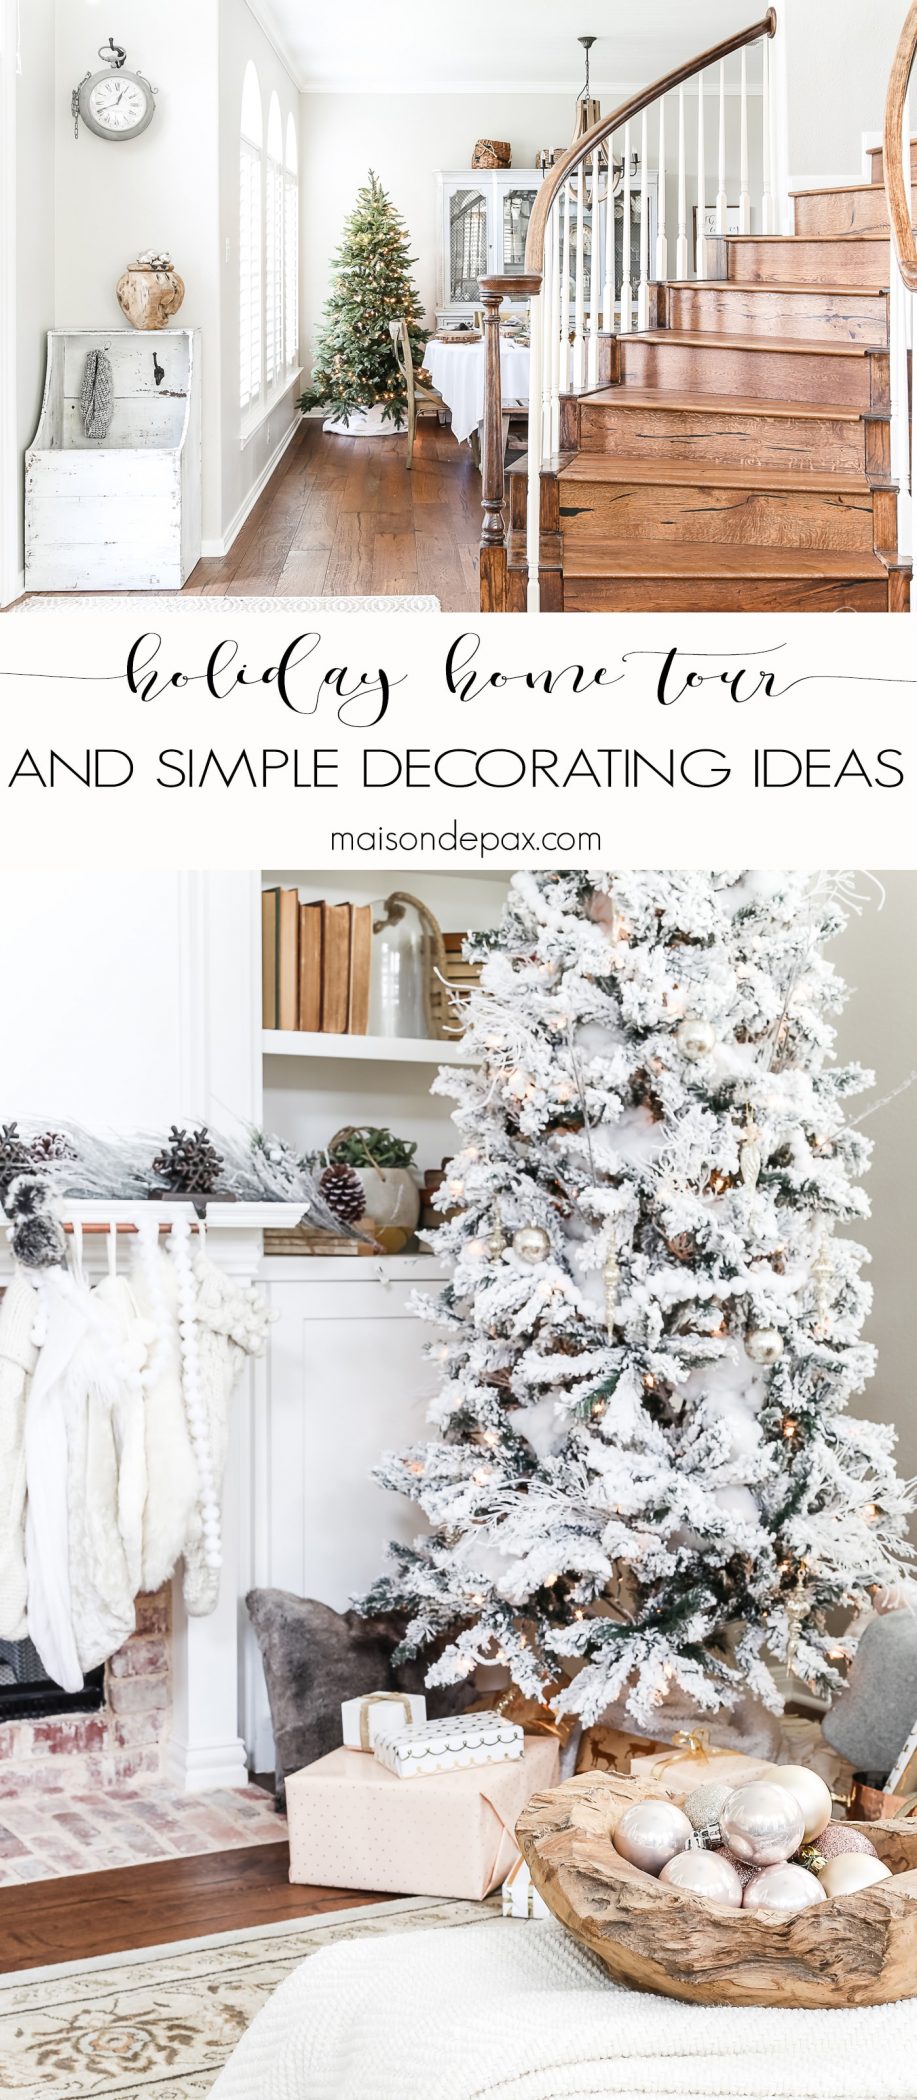 Christmas Home Tour: simple decorating ideas for a beautiful holiday home with neutrals and natural greenery #holidaydecorating